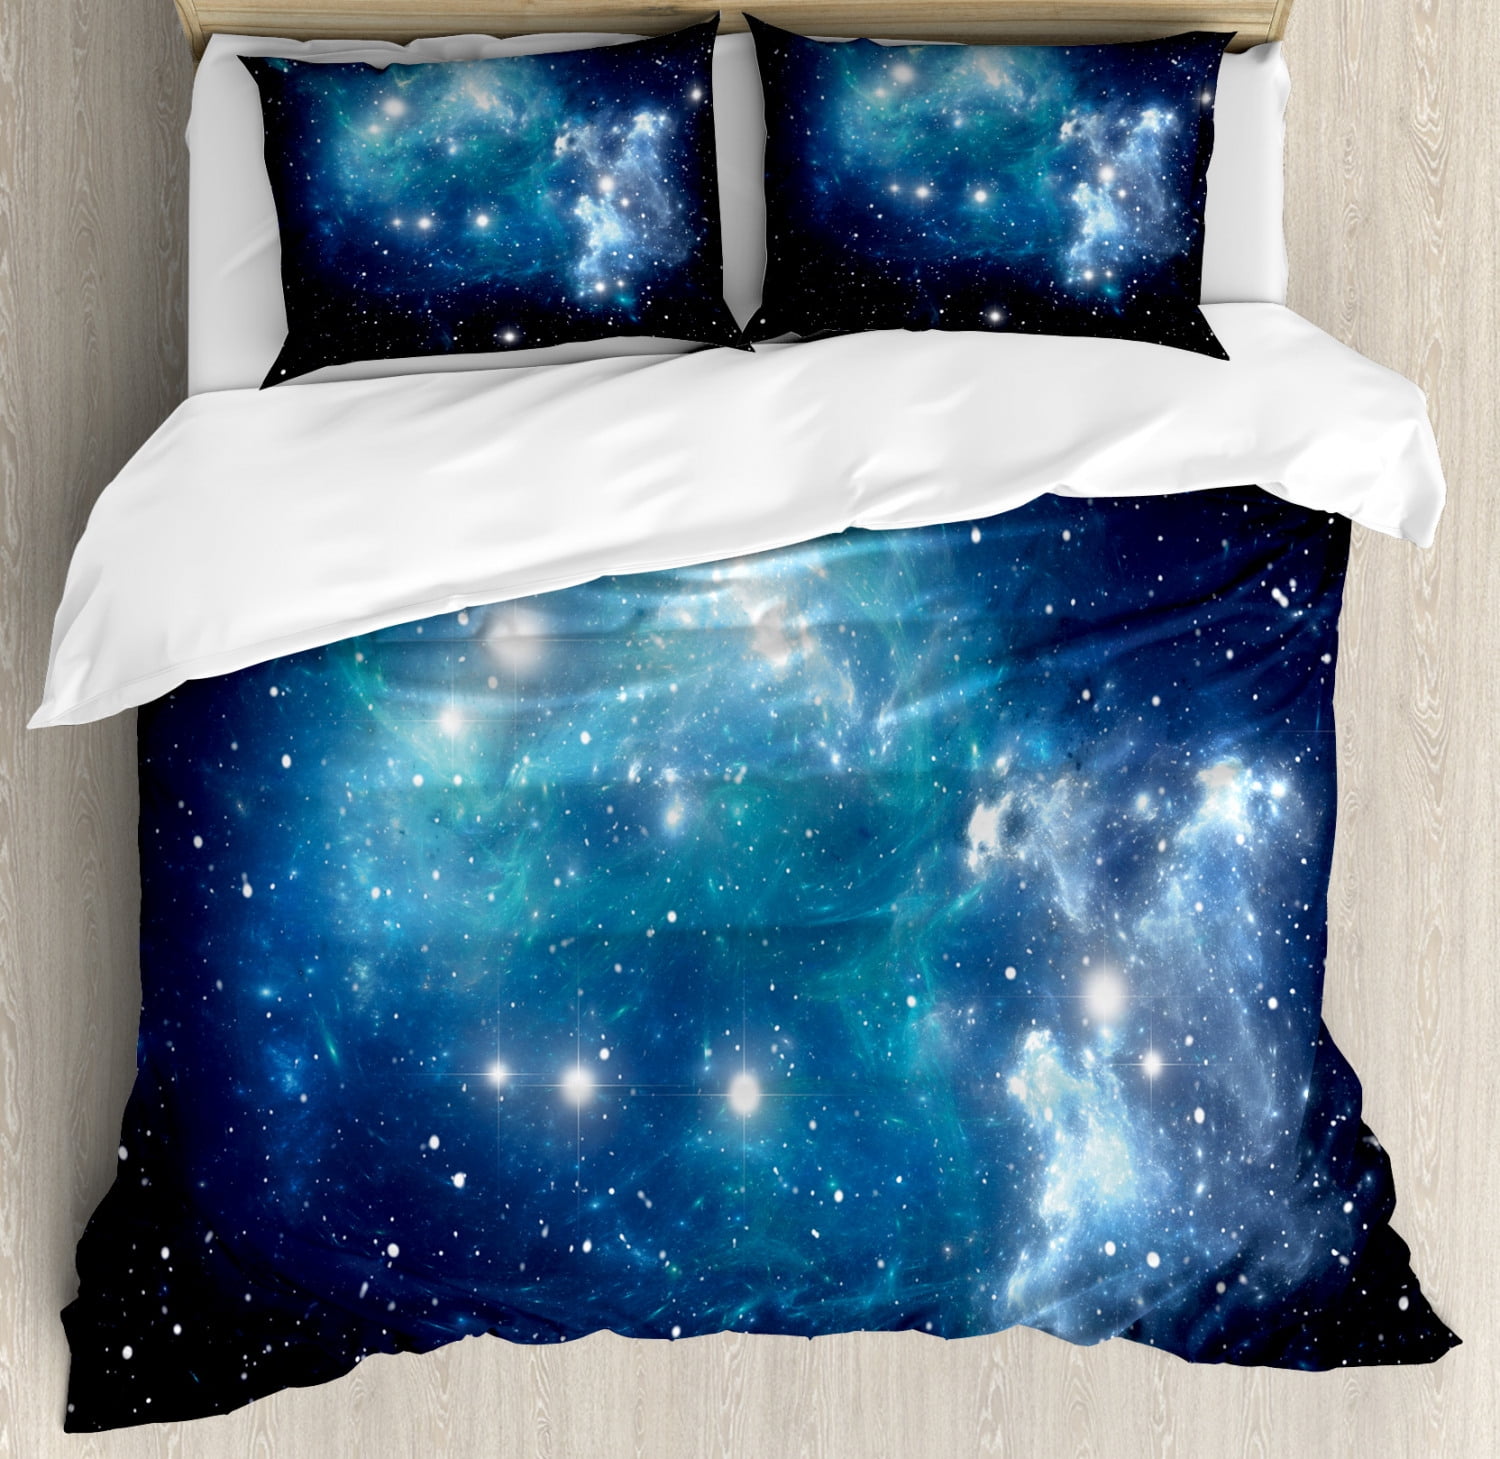 Space Duvet Cover Set Queen Size, Vibrant Celestial Supernova Scenery  Dynamic Energy Andromeda Mystical Outer Space Picture, Decorative 3 Piece  